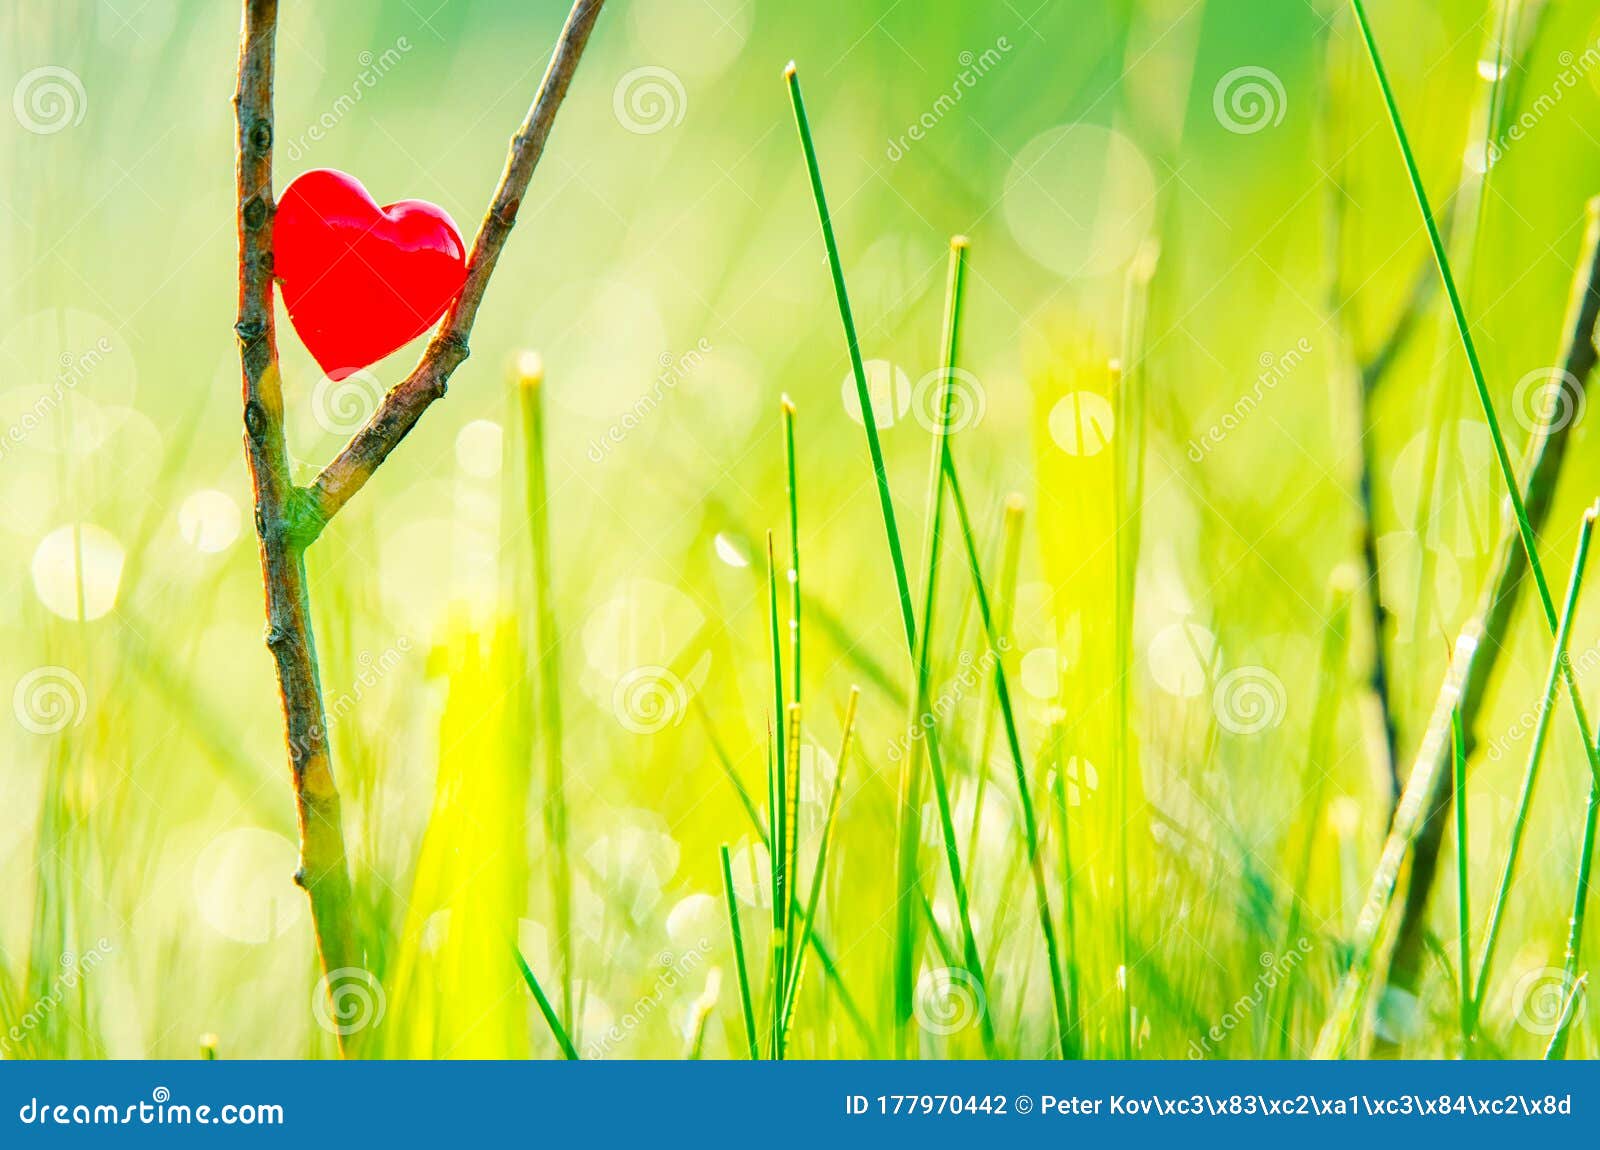 Red Heart in Nature with Wonderful Morning Drops Background and Beautiful  Light. Original Wallpaper or Postcard for Wedding or Stock Photo - Image of  mini, empty: 177970442